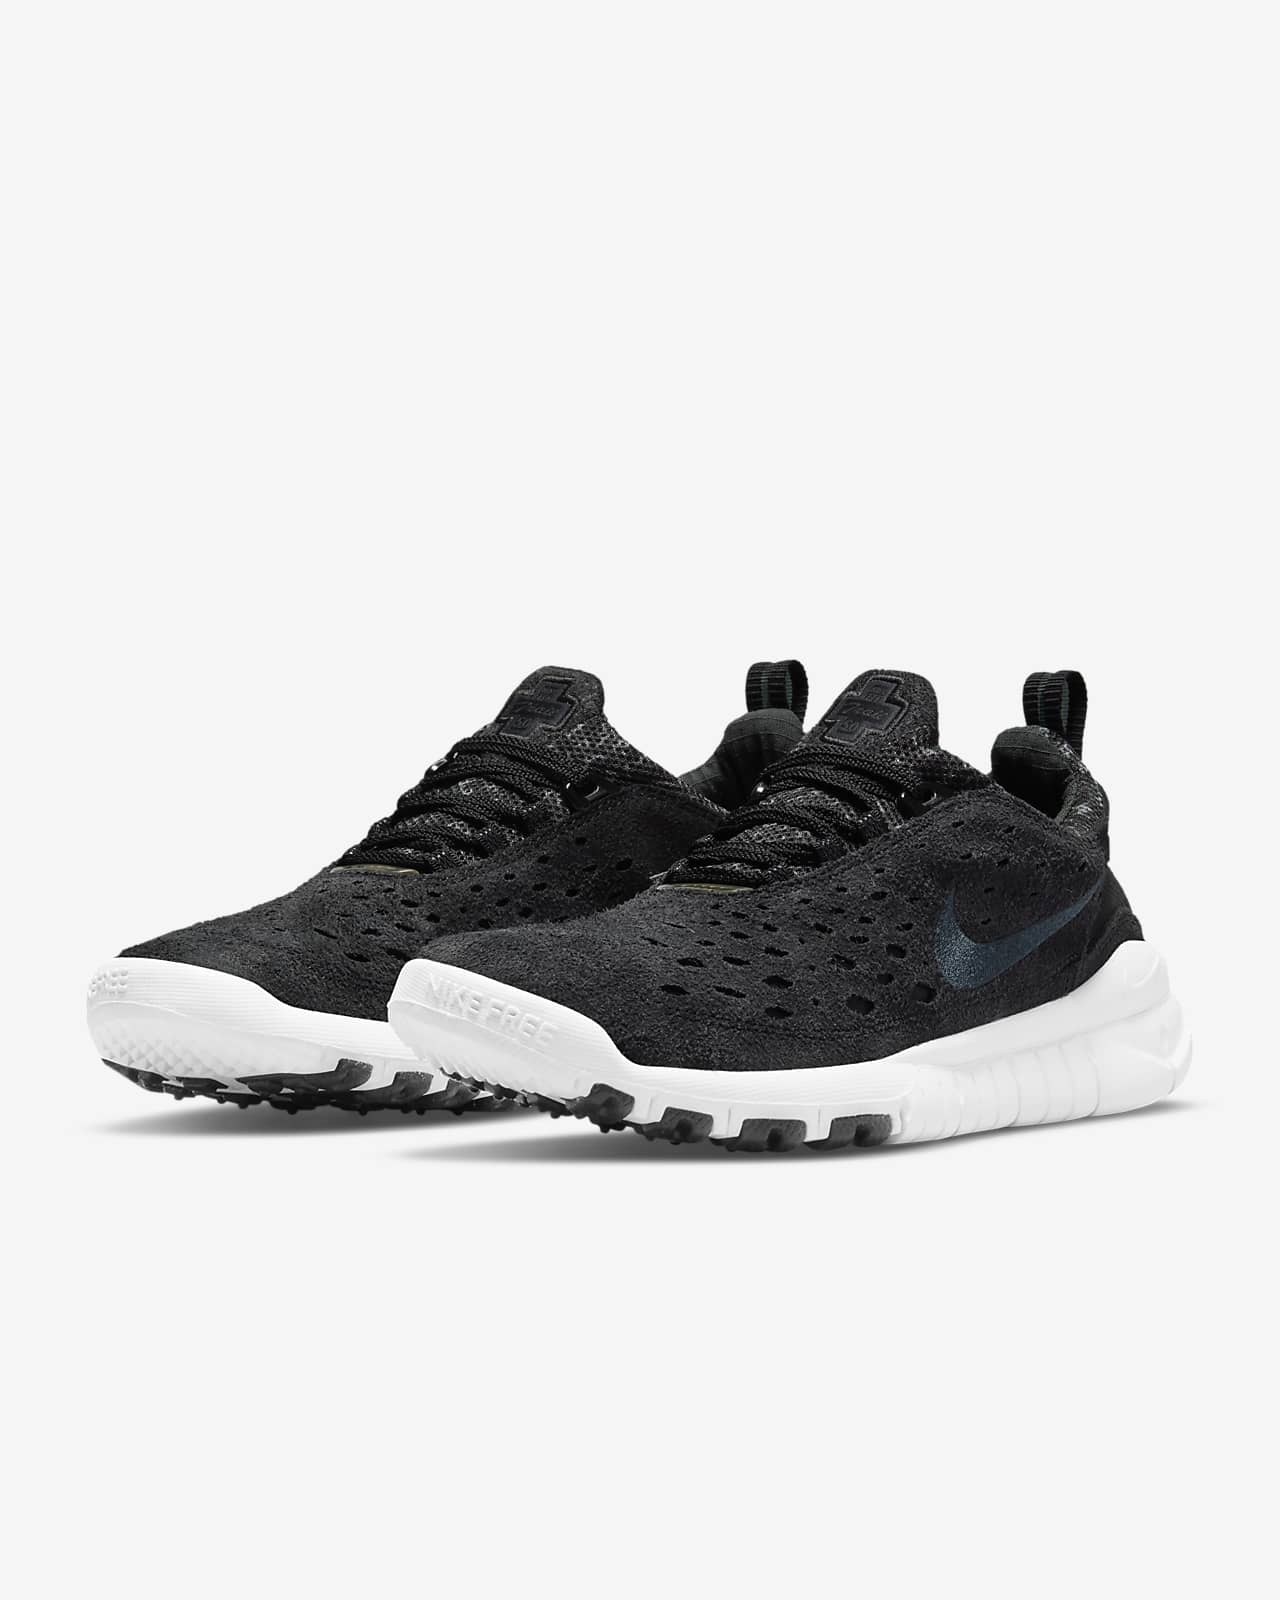 nike free homme chaussures ريد كاربت